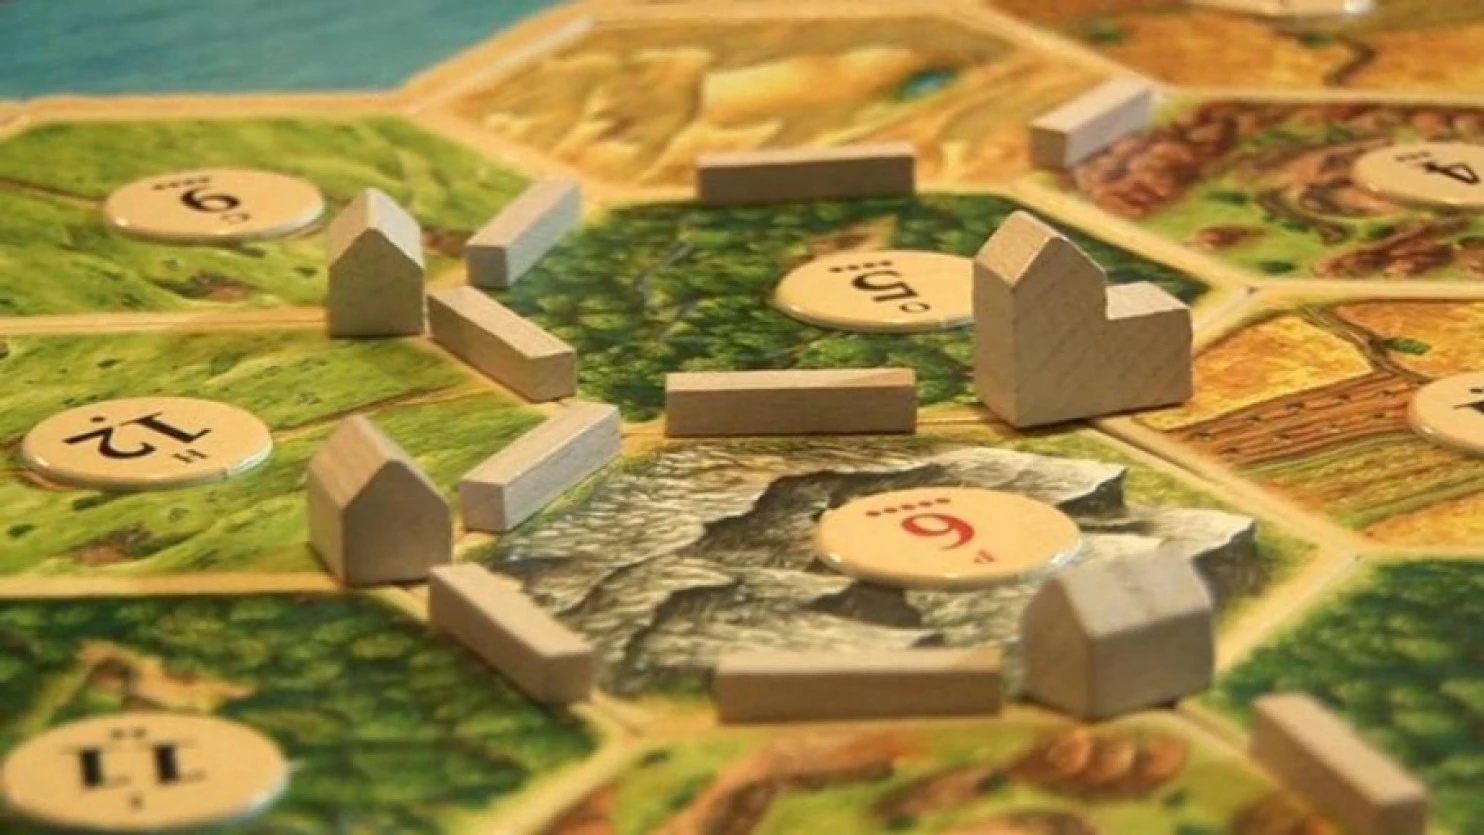 The Washington Post: A First Look at Settlers of Catan: The Movie